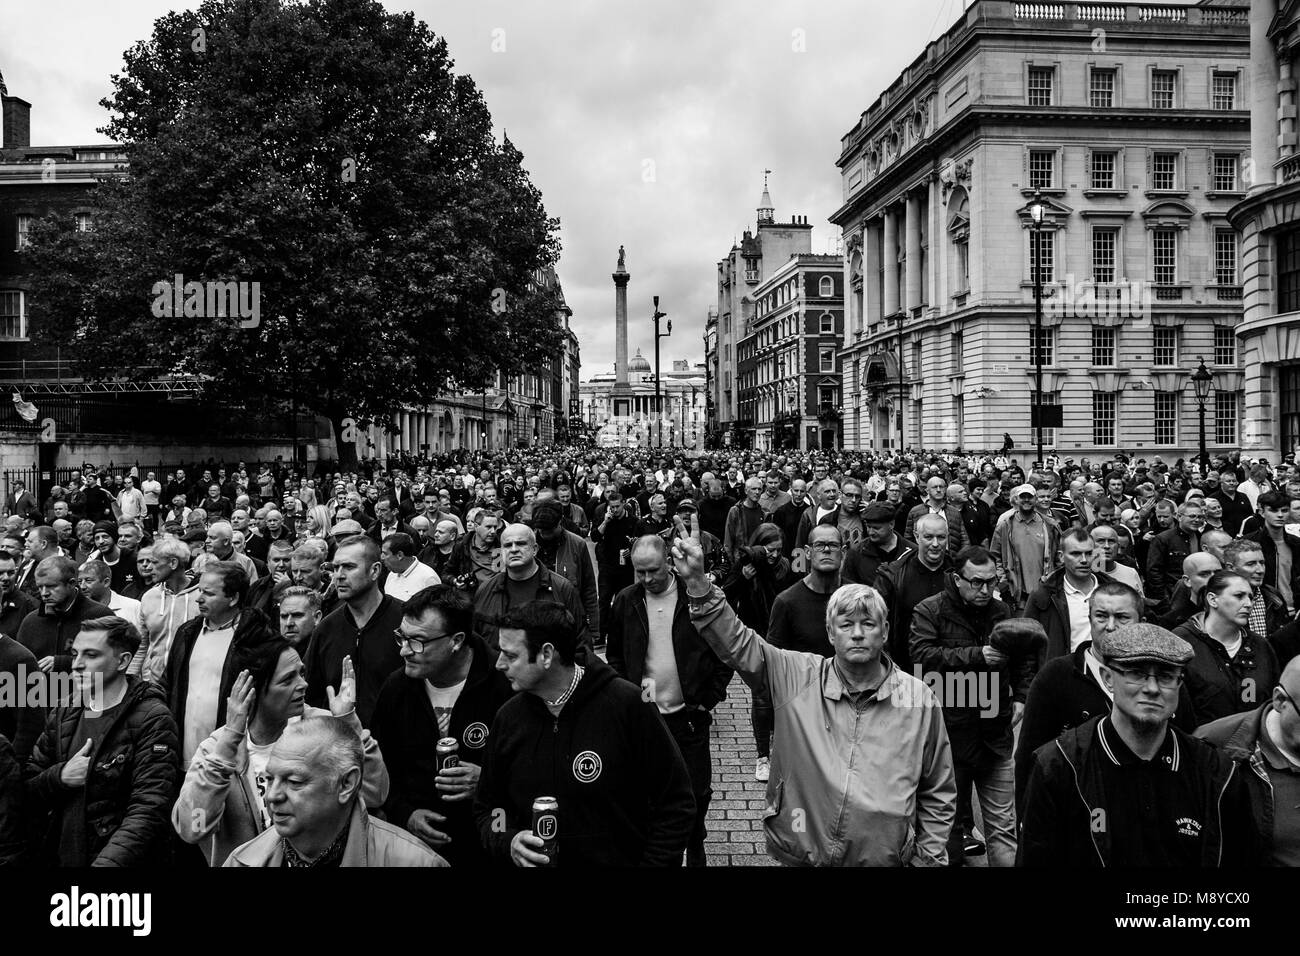 Football fans from across the UK marching against extremism under the banner of the FLA (football lads alliance), Whitehall, London, UK Stock Photo